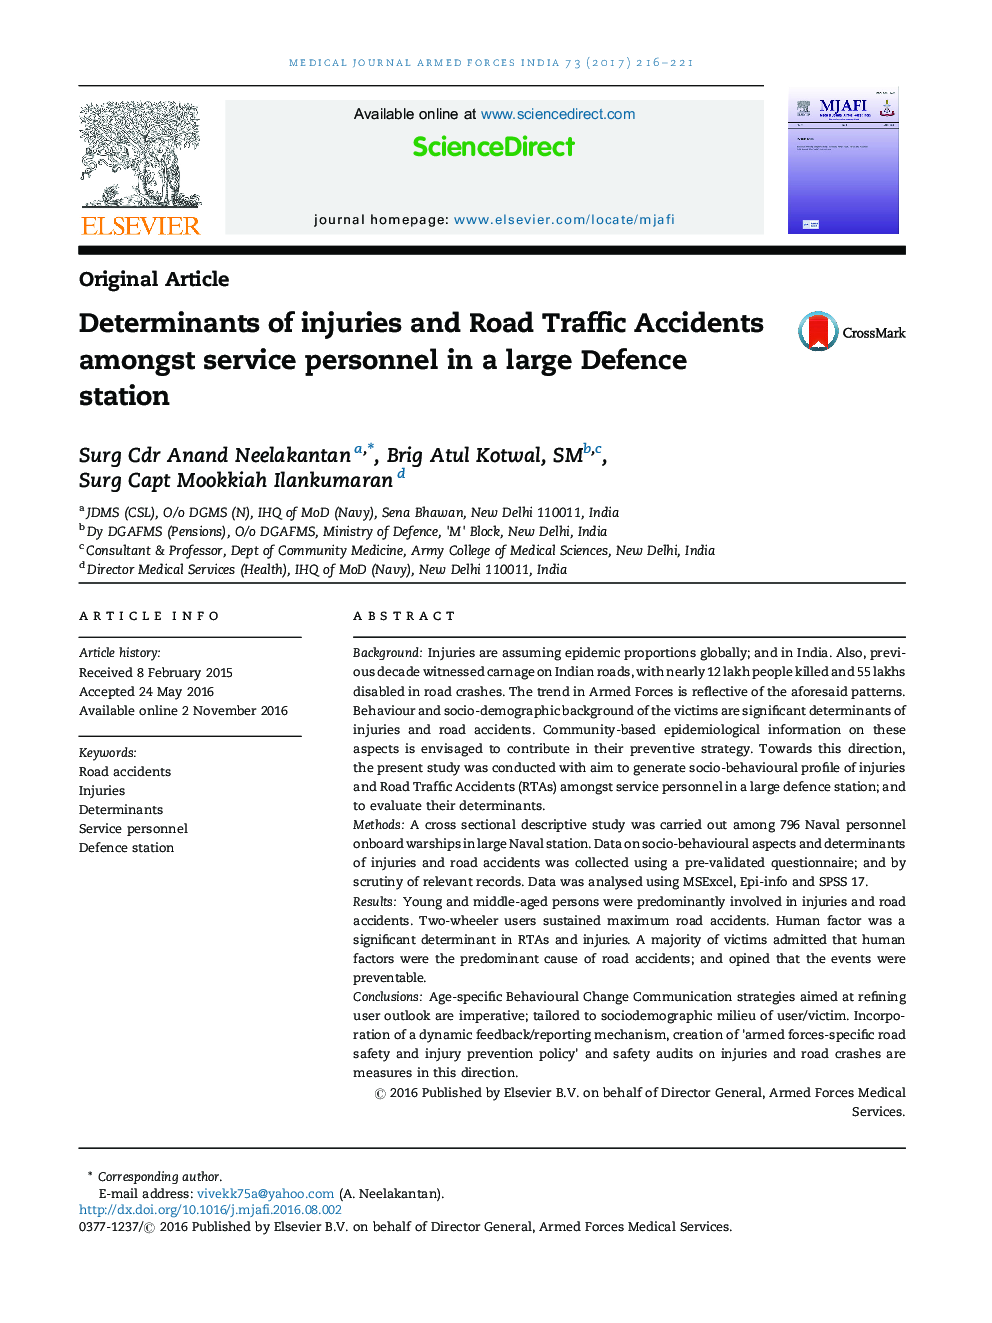 Determinants of injuries and Road Traffic Accidents amongst service personnel in a large Defence station